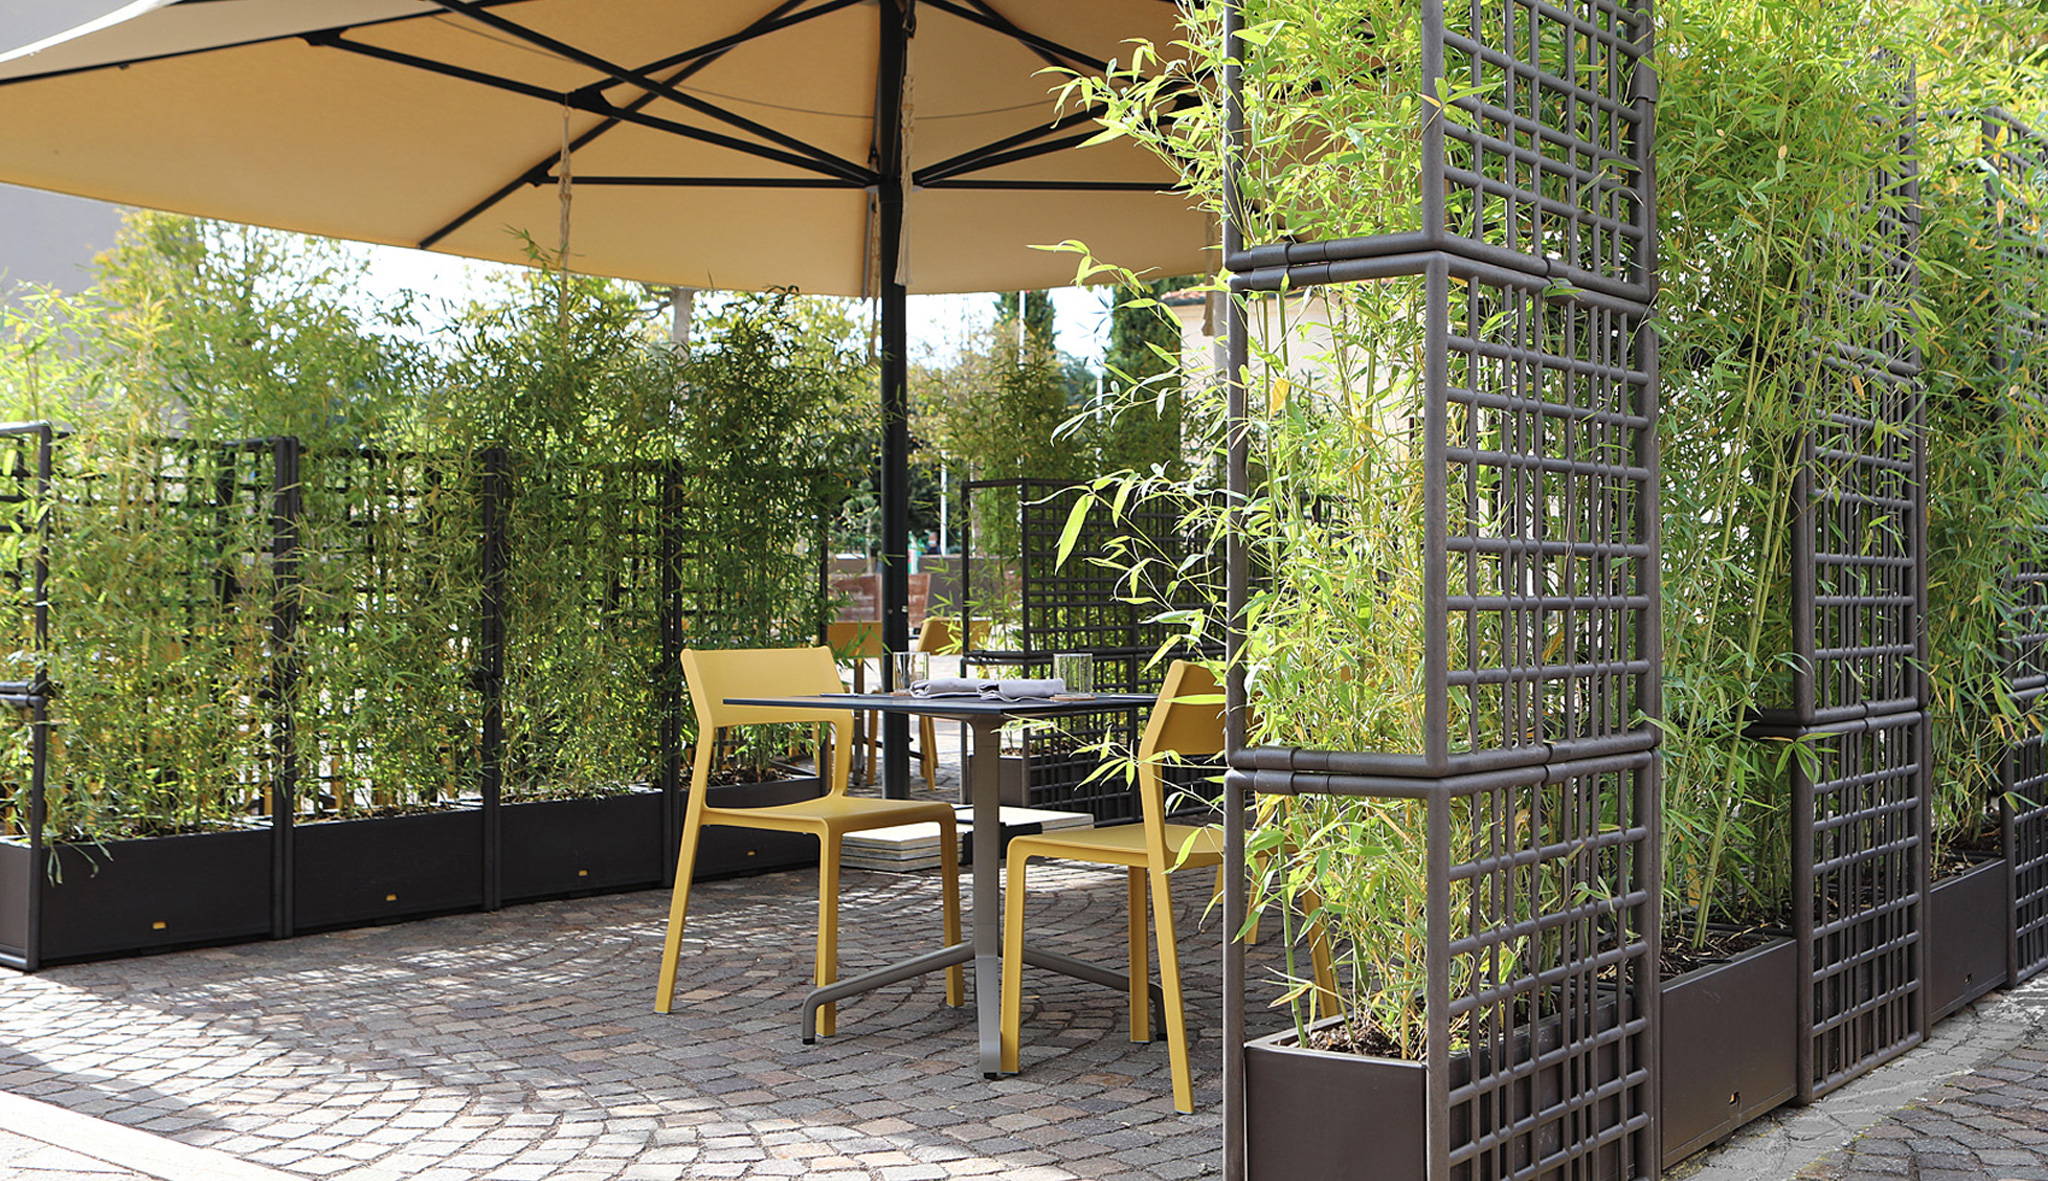 Trill chairs By Nardi - Dine Outdoors